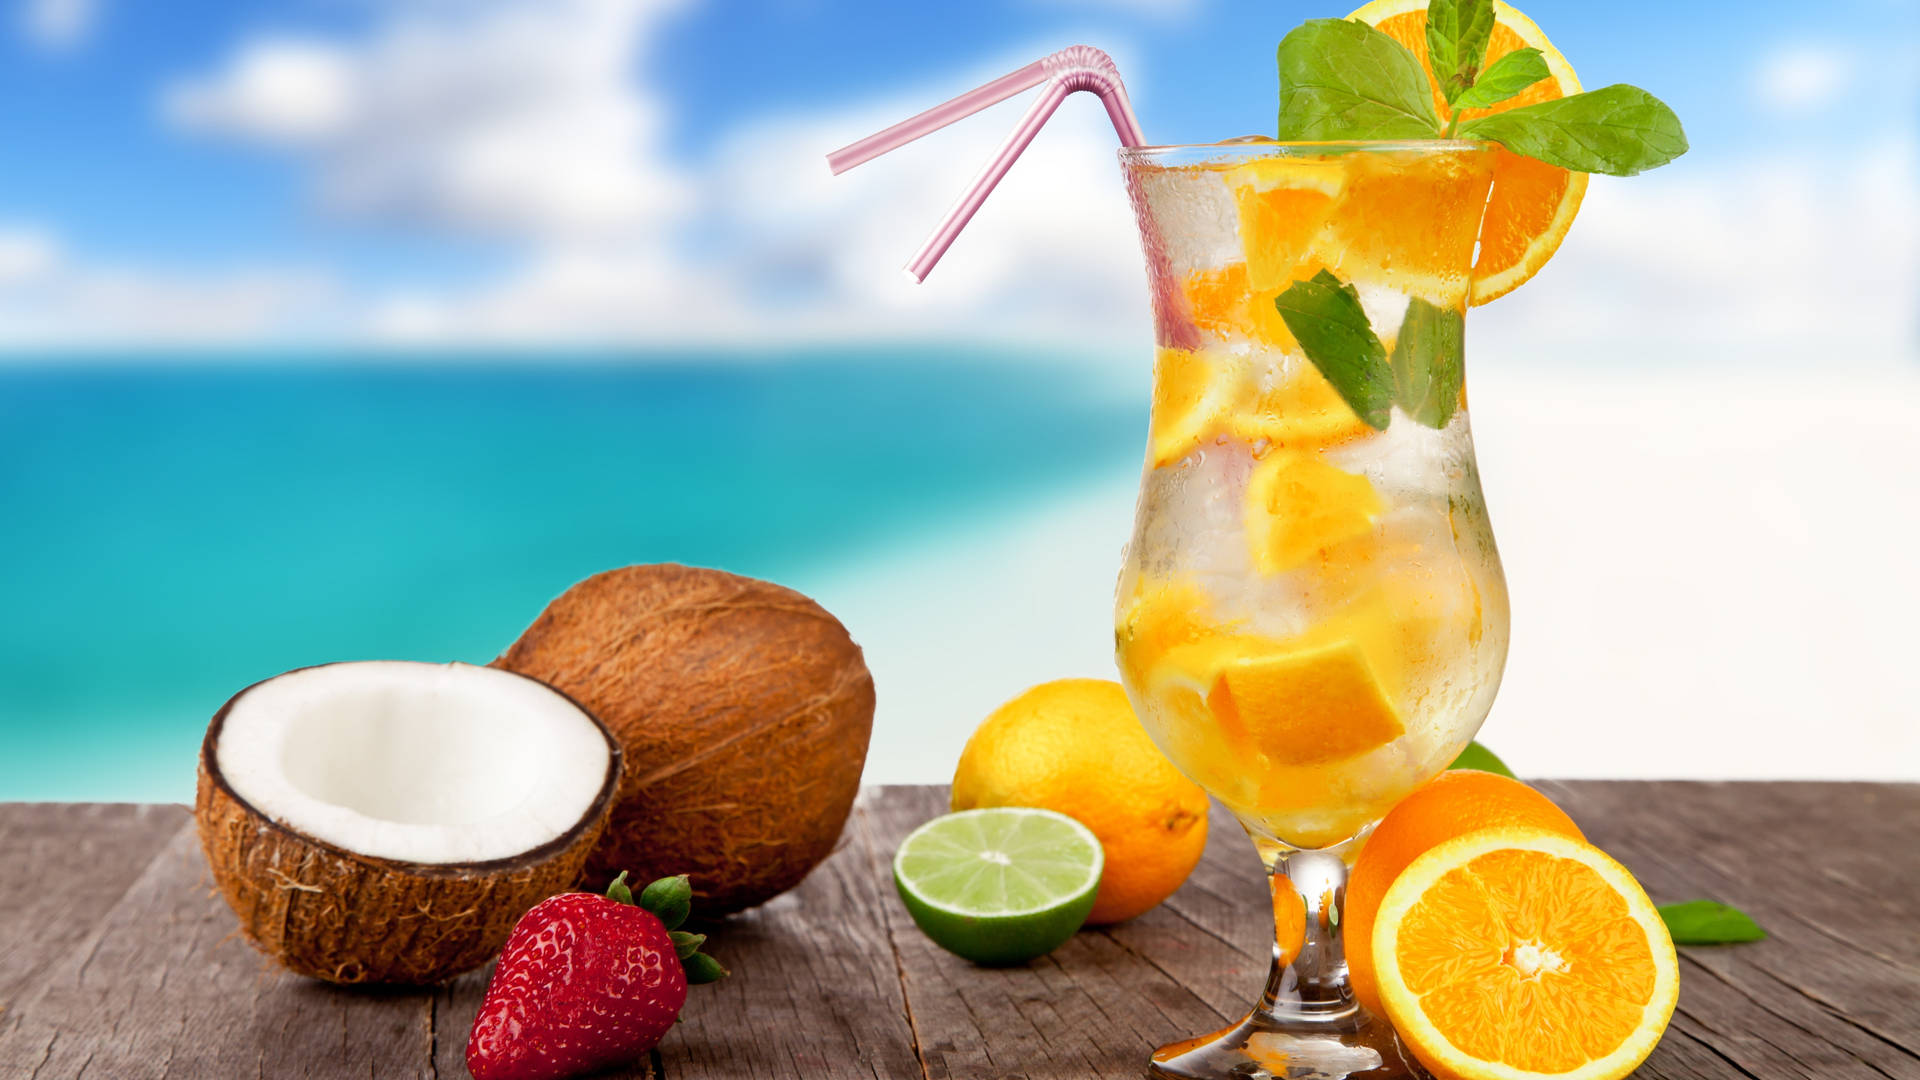 Orange And Lime Tropical Drink Wallpaper